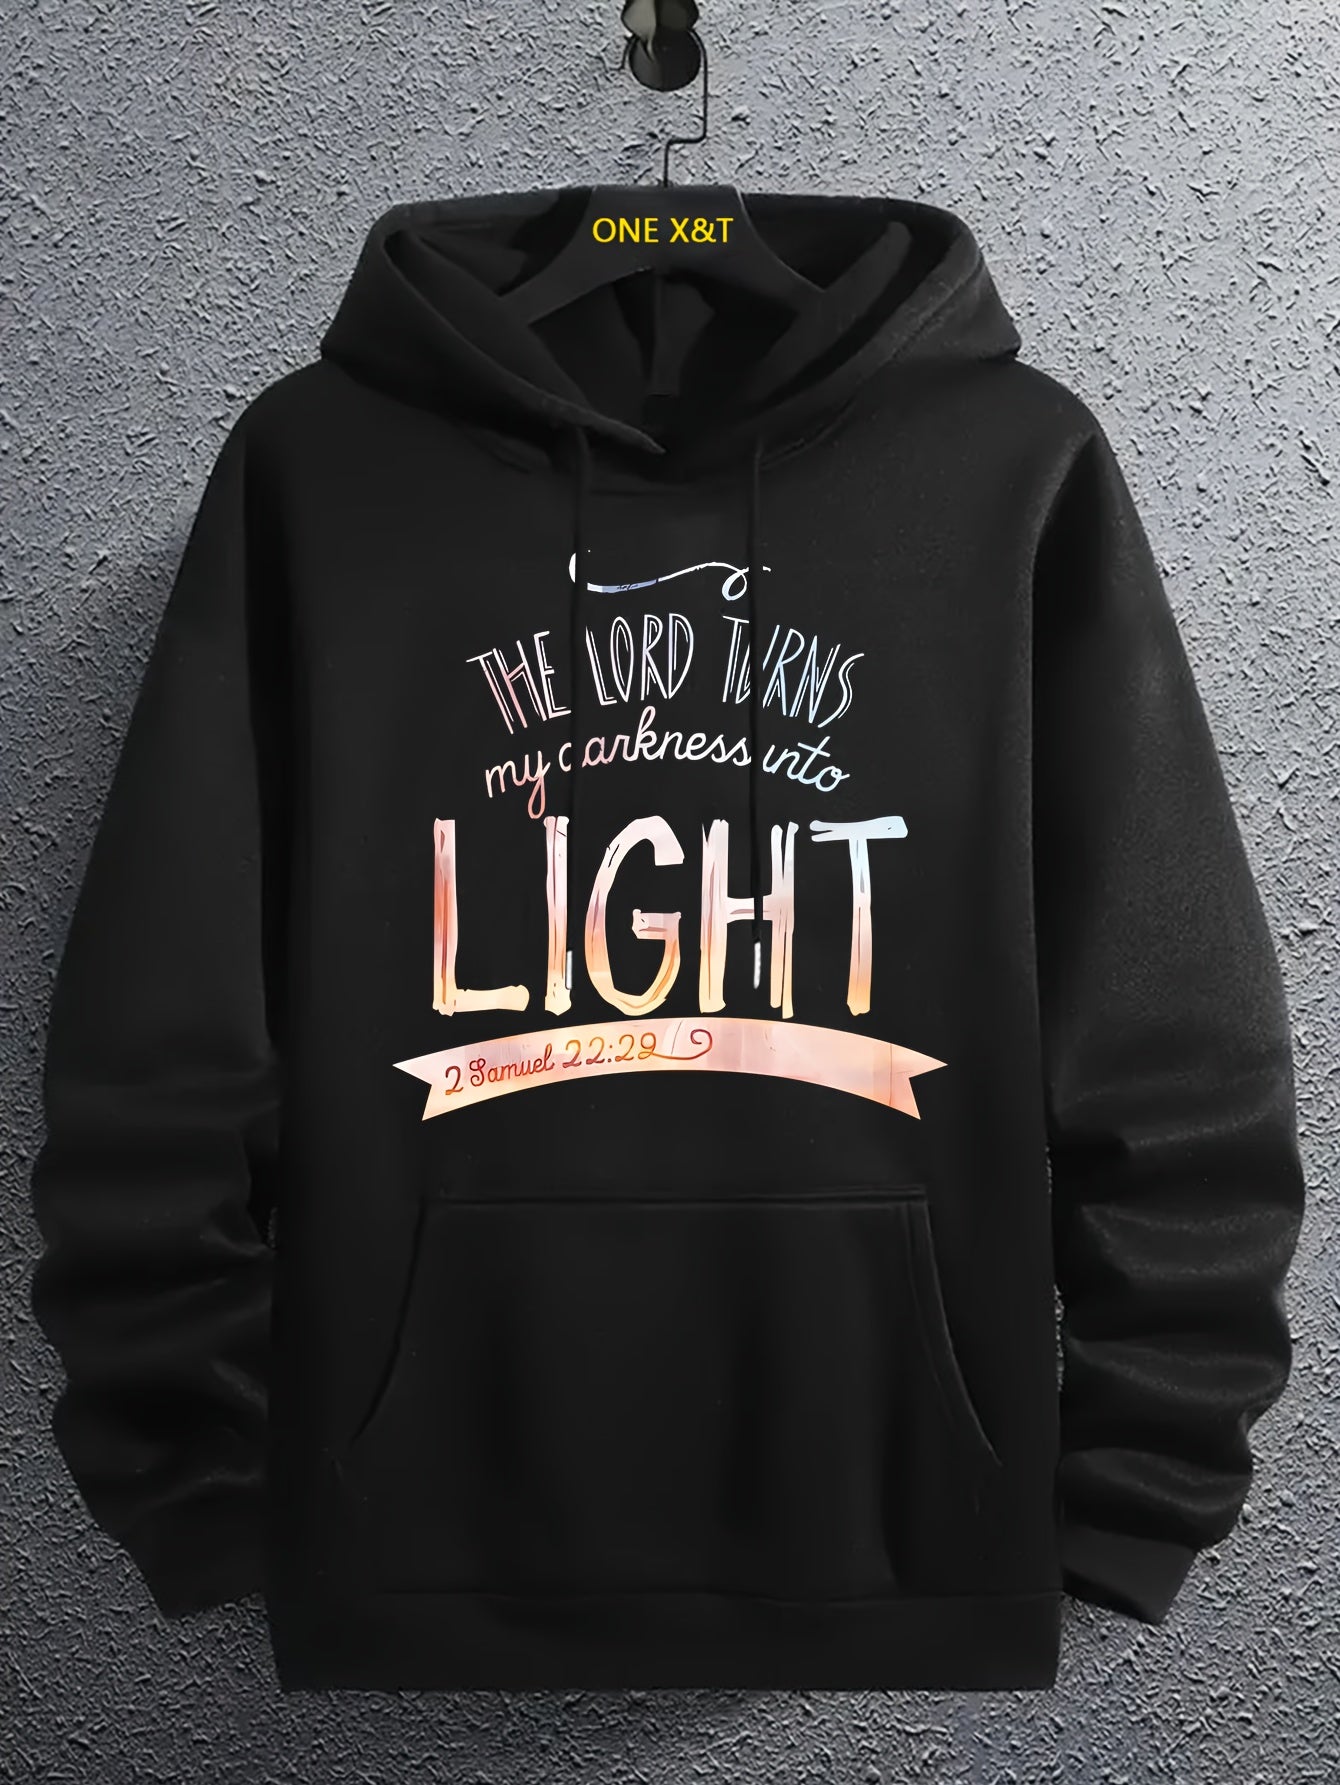 2 Samuel 22:22 The Lord Turns My Darkness Into Light Unisex Christian Pullover Hooded Sweatshirt claimedbygoddesigns